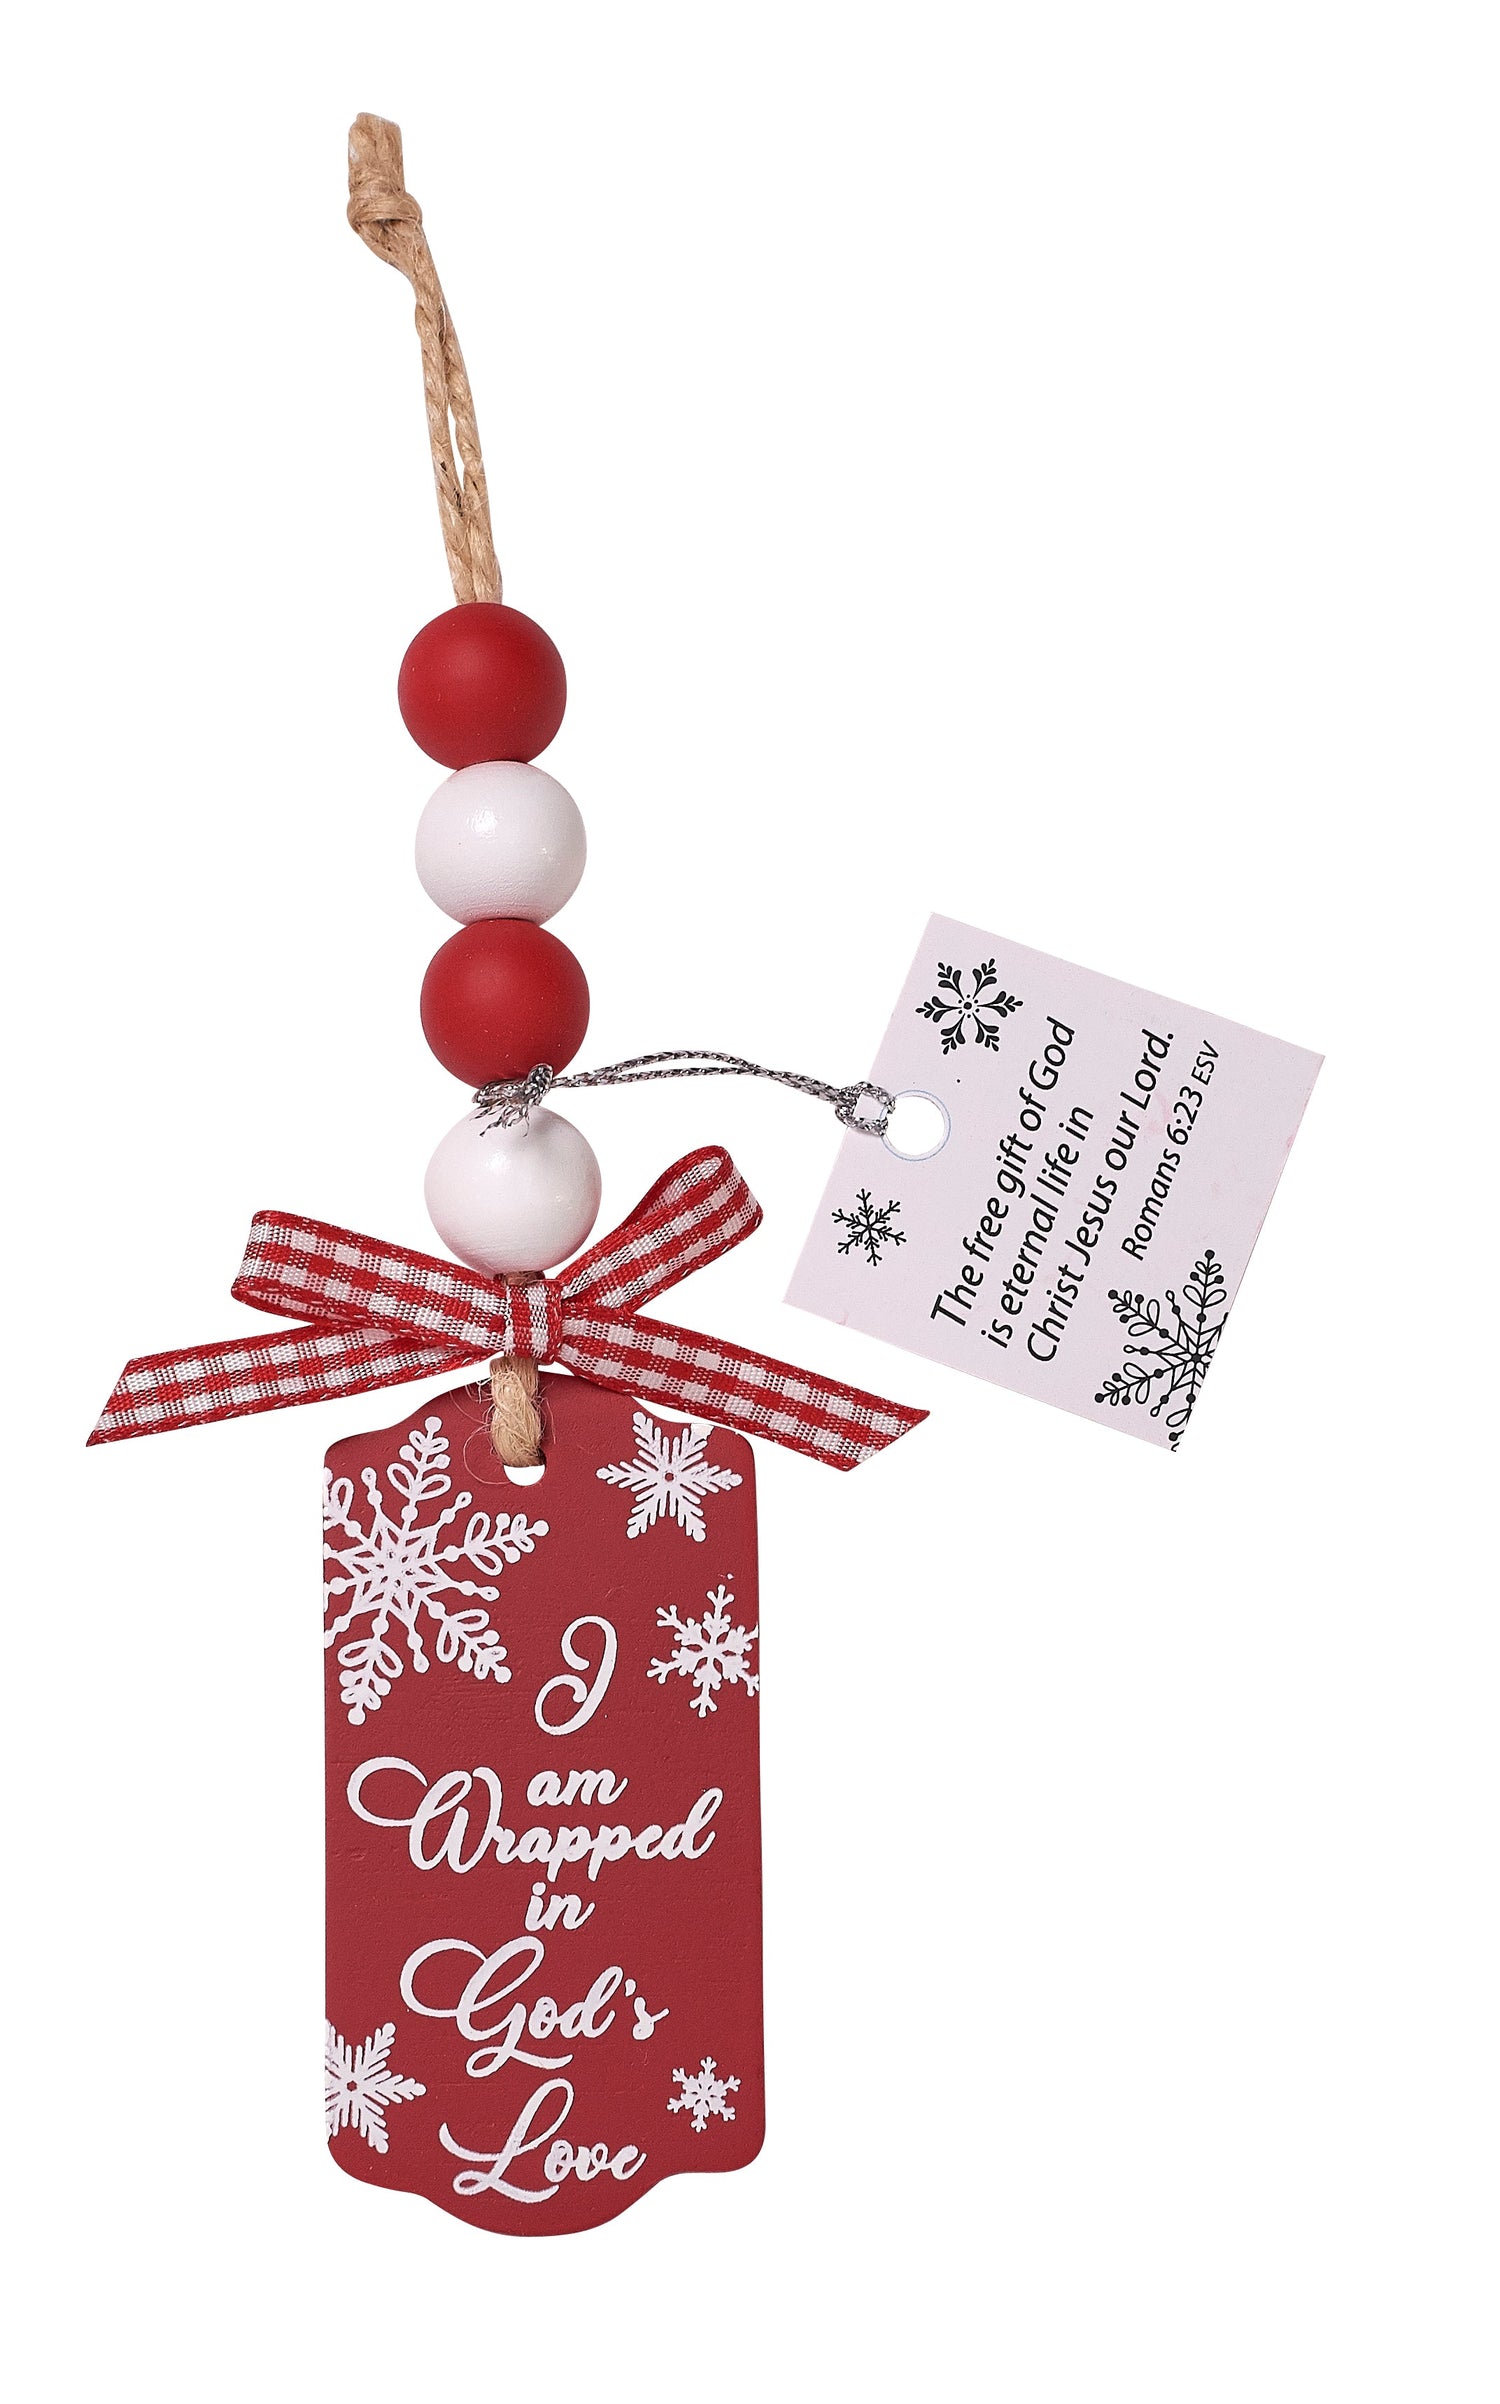 Wooden Bead Ornament - Wrapped in God's Love